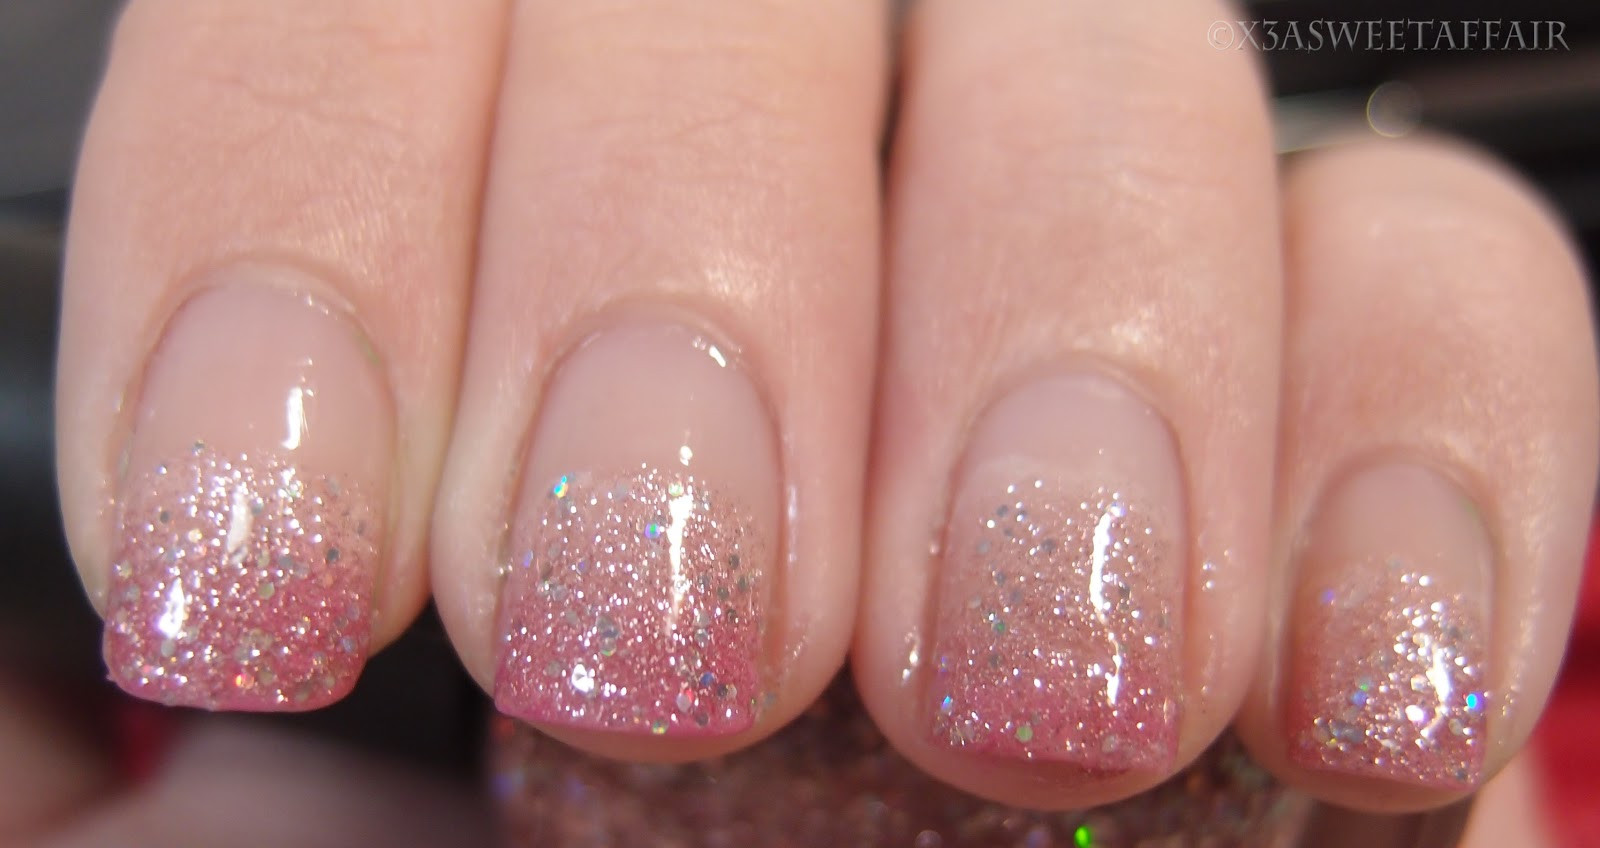 Glitter Ombre Gel Nails
 x3ASweetAffair Naturally Nails Pink ombre glitter